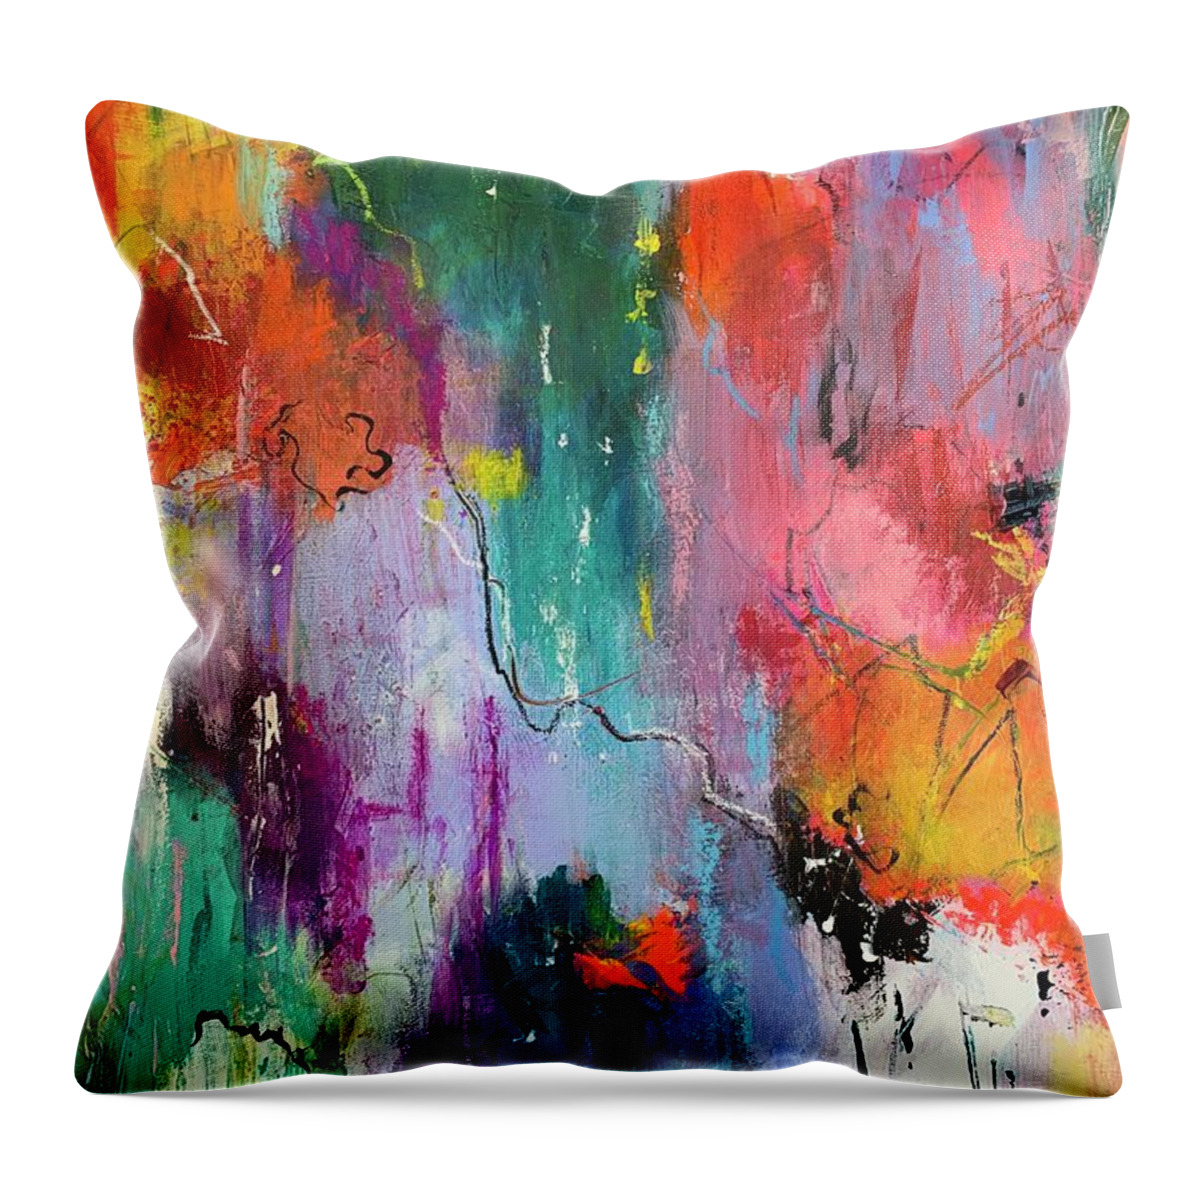 Bright Throw Pillow featuring the painting Shes A Rainbow by Bonny Butler